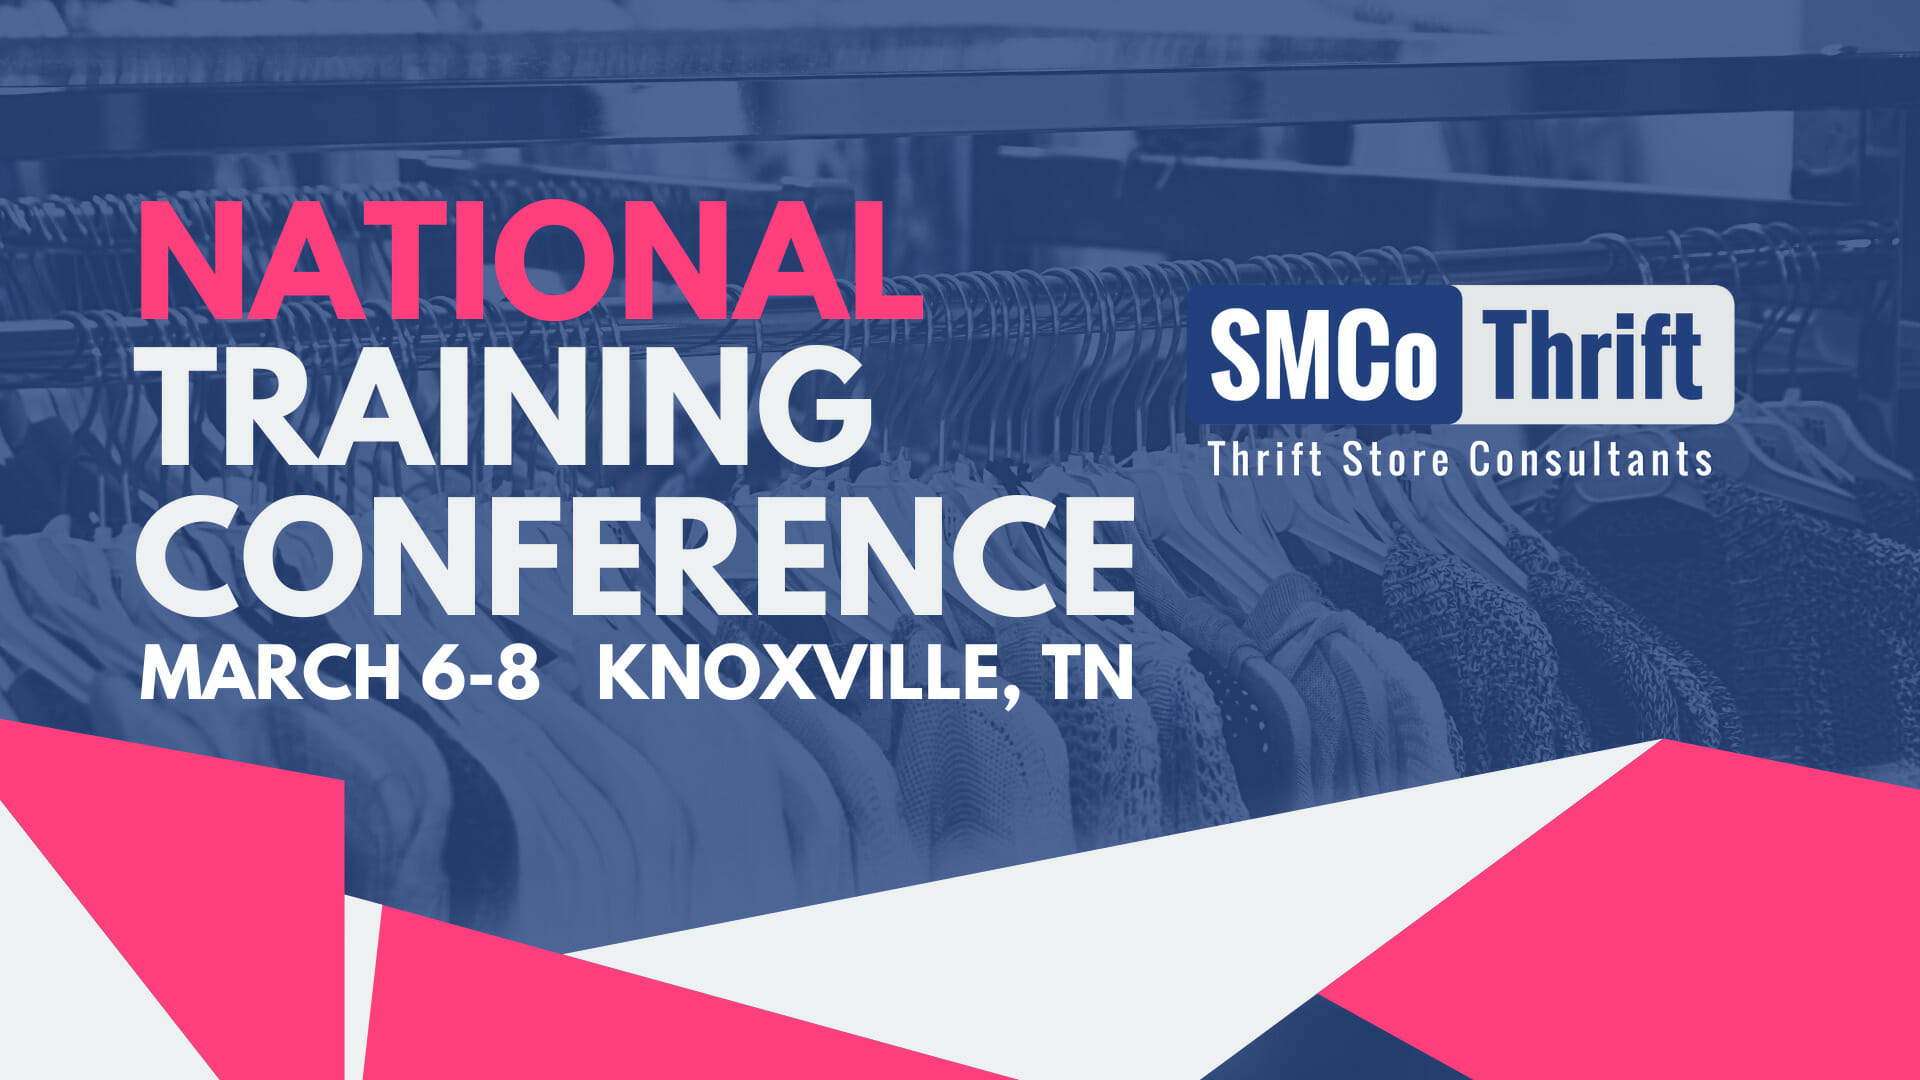 Thrift National Training Conference